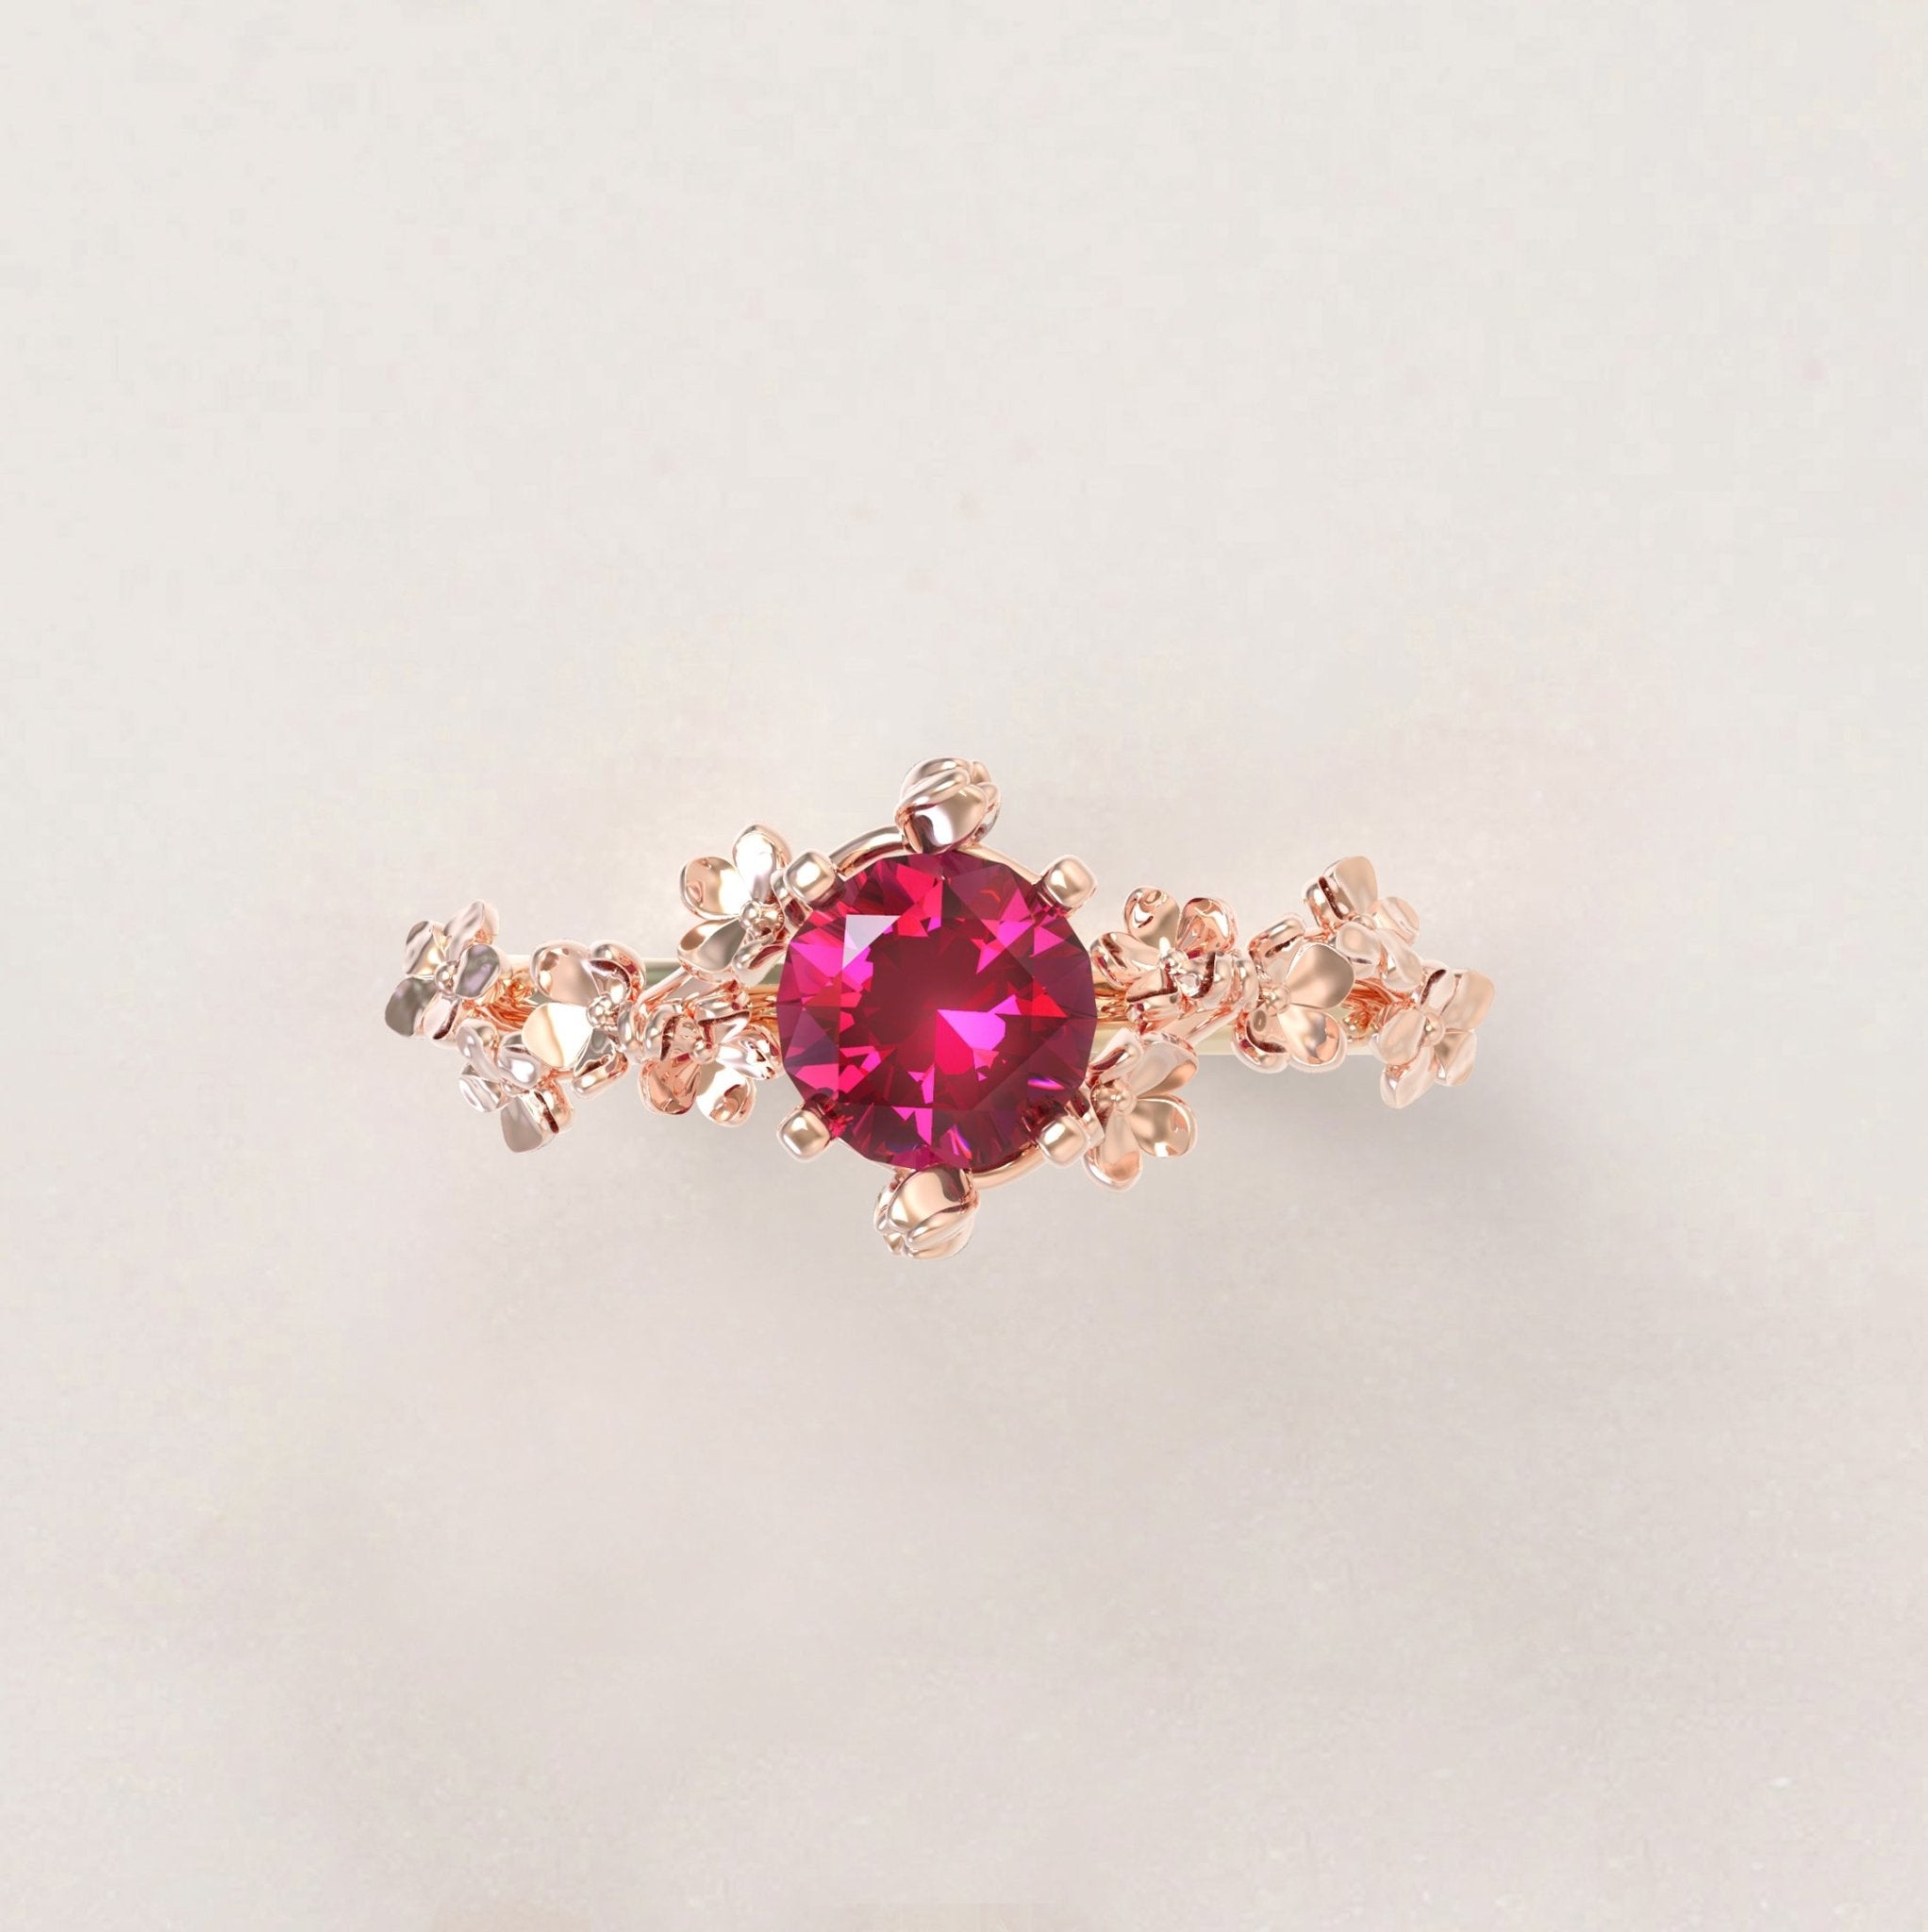 Unique Flowers Engagement Ring No.6 Version 2 in Yellow Band/Rose Flowers Gold - Red Ruby - Roelavi